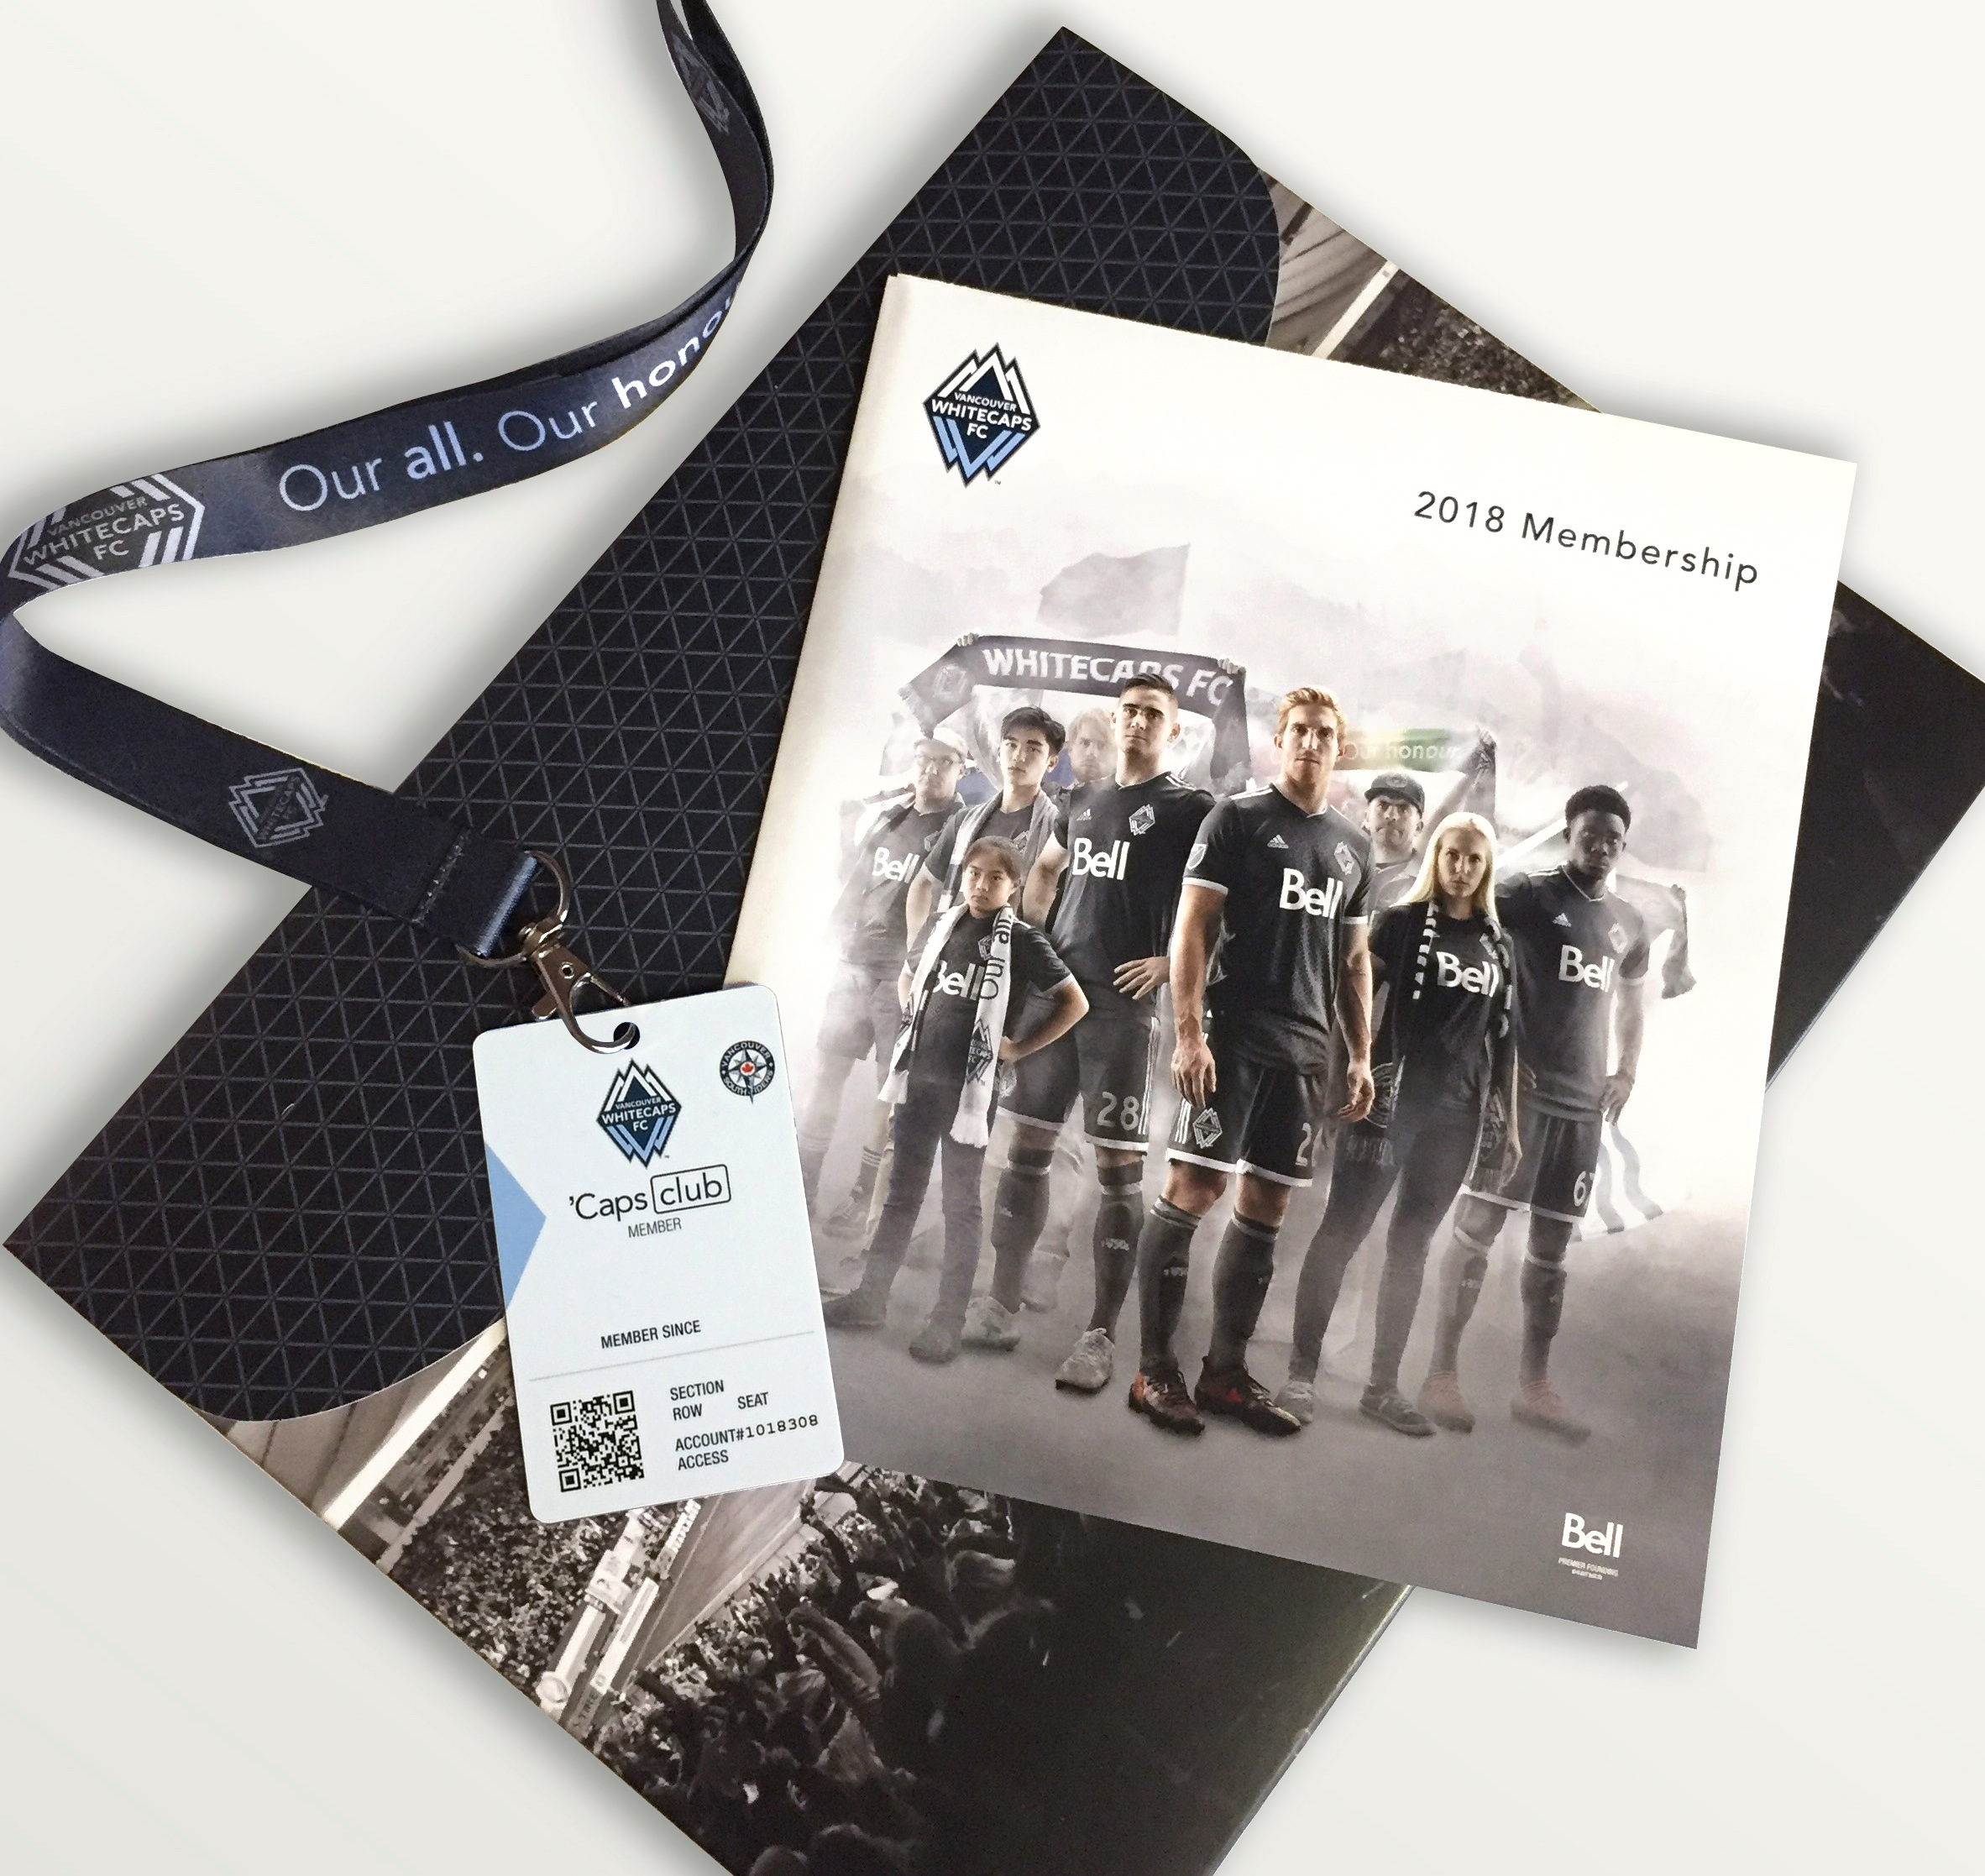 New Whitecaps FC Unity Jersey for 2018